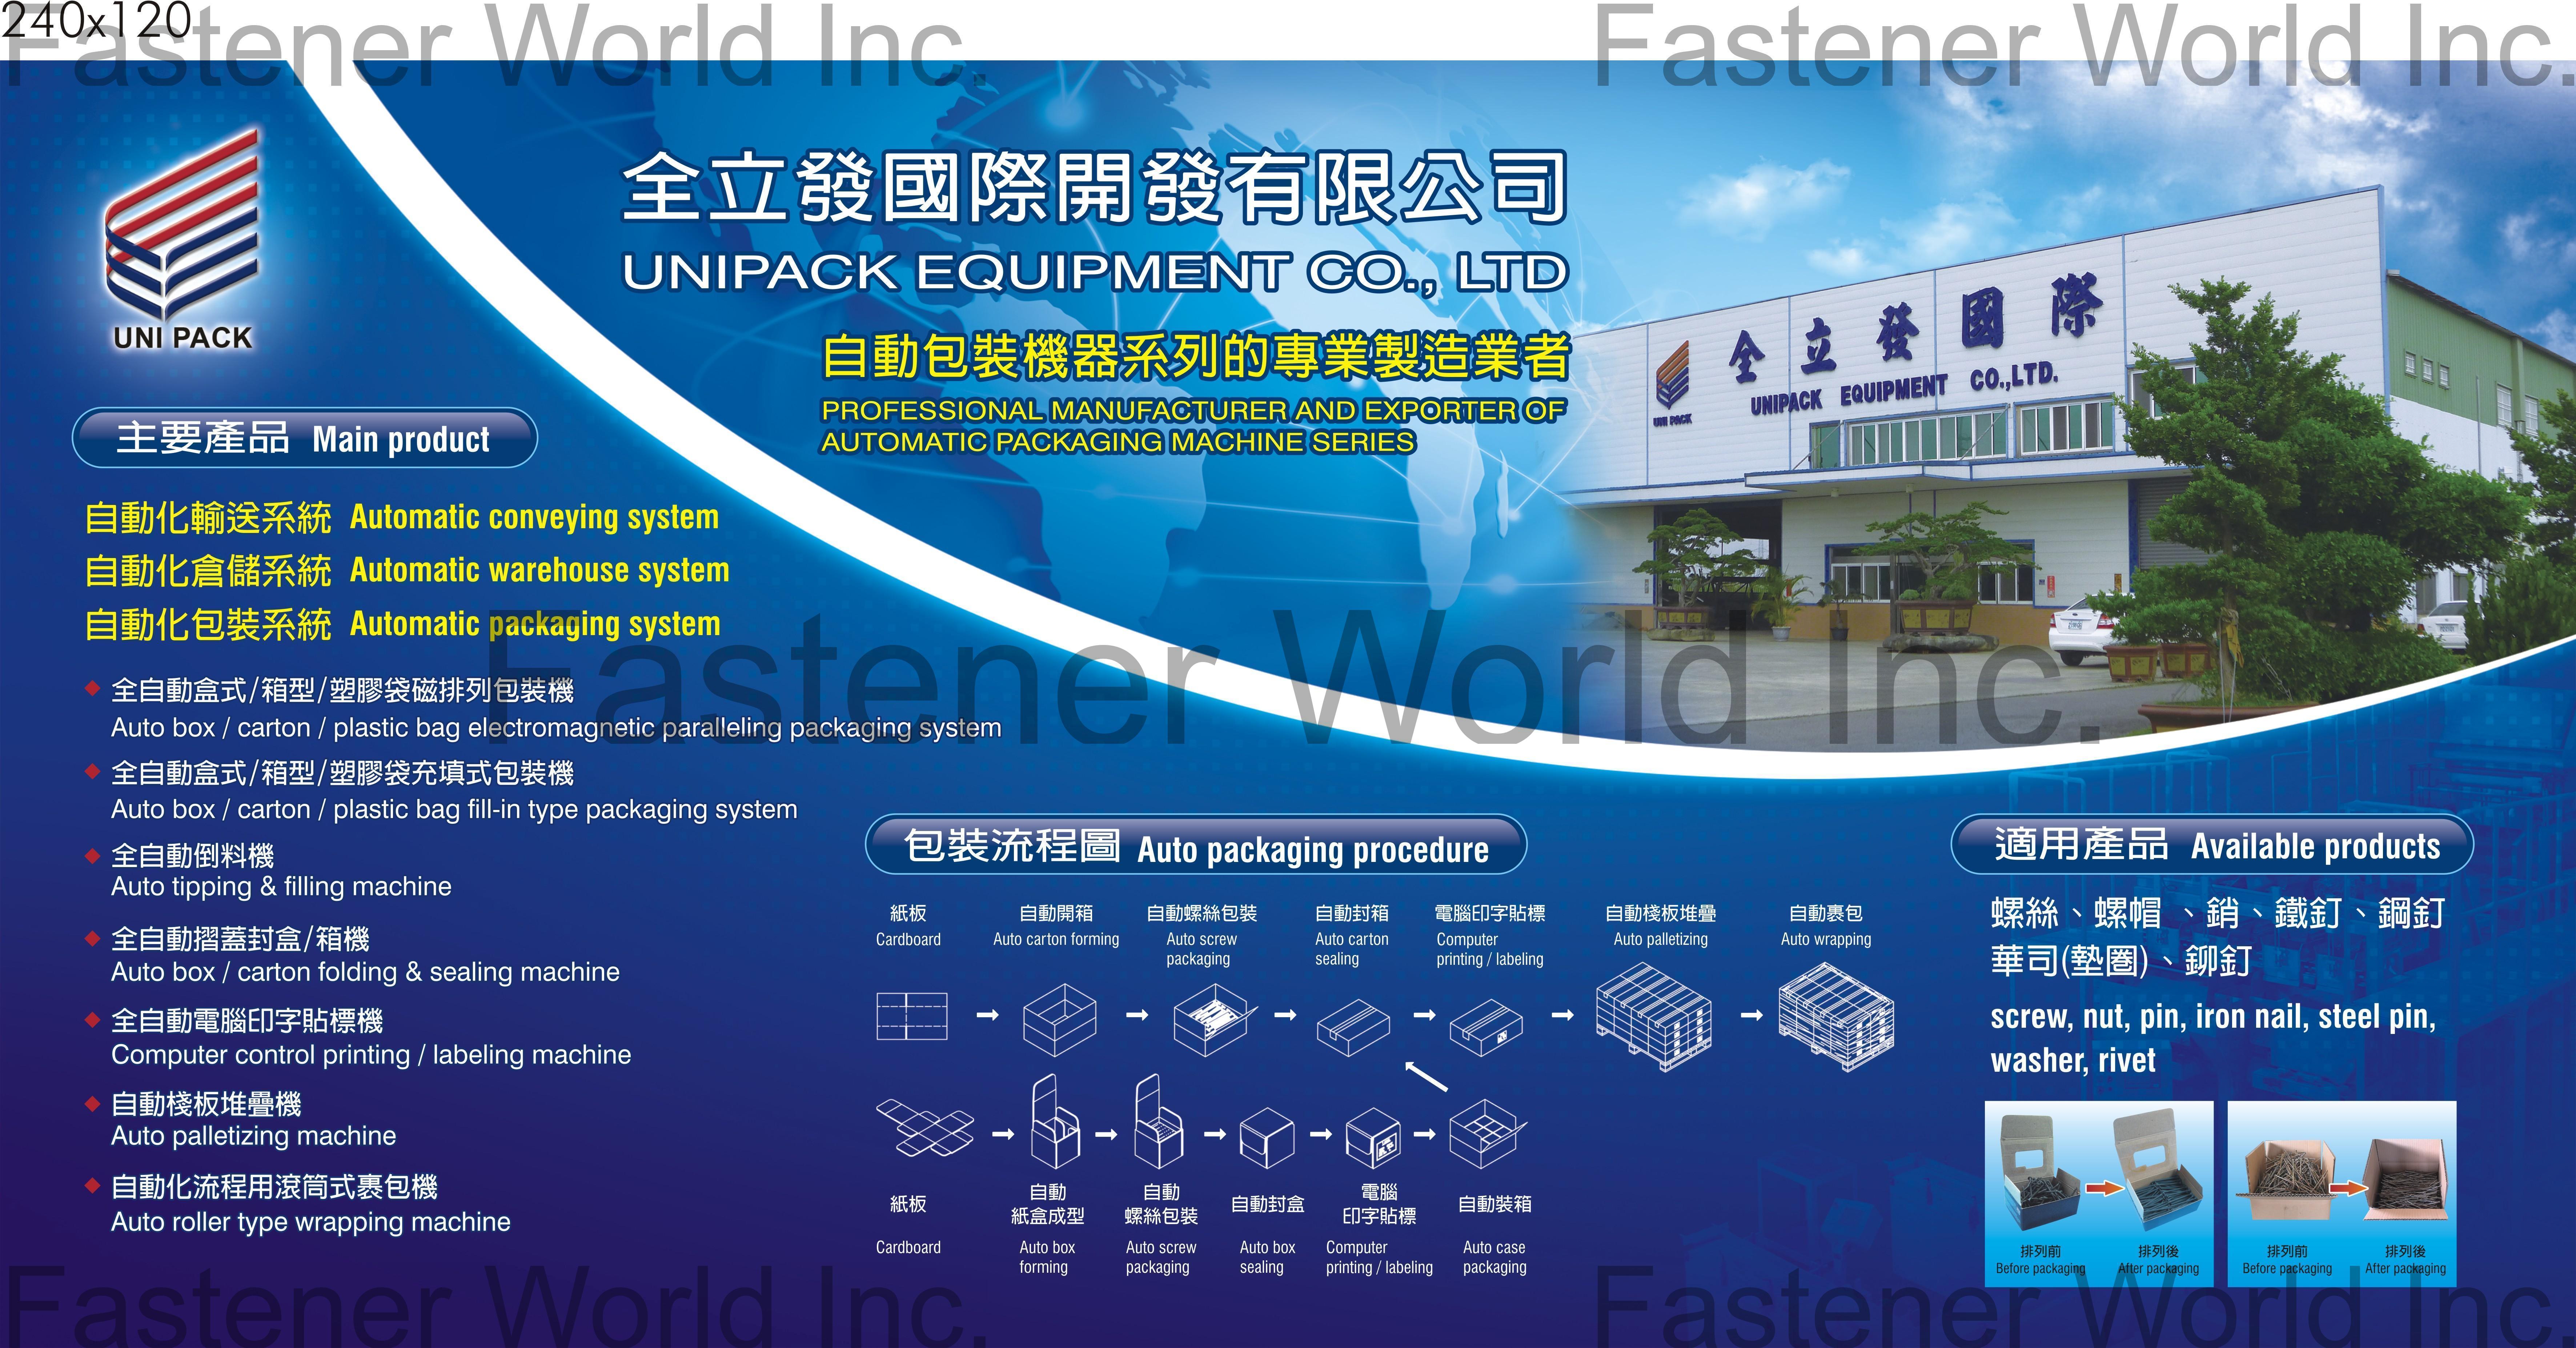 UNIPACK EQUIPMENT CO., LTD.  , Automatic Conveying System, Automatic Warehouse System, Automatic Packaging System, Auto Box / Carton / Plastic Bag Electromagnetic Paralleling Packaging System, Auto Box / Carton / Plastic Bag Fill-in Type Packaging System, Auto Tipping & Filling Machine, Auto Box / Carton Folding & Sealing Machine, Computer Control Printing / Labeling Machine, Auto Palletizing Machine, Auto Roller Type Wrapping Machine , Others